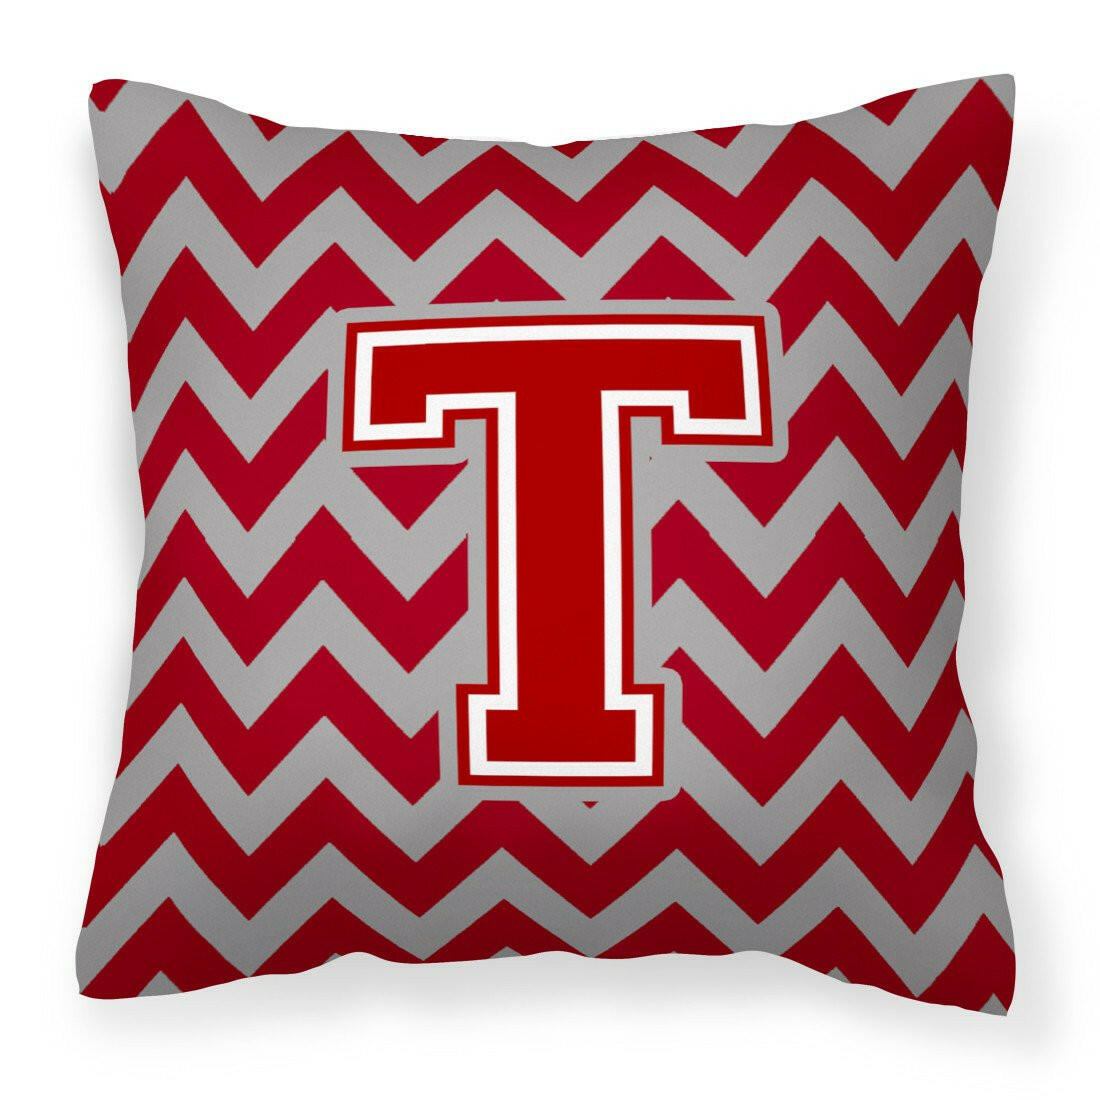 Letter T Chevron Maroon and White Fabric Decorative Pillow CJ1049-TPW1414 by Caroline's Treasures